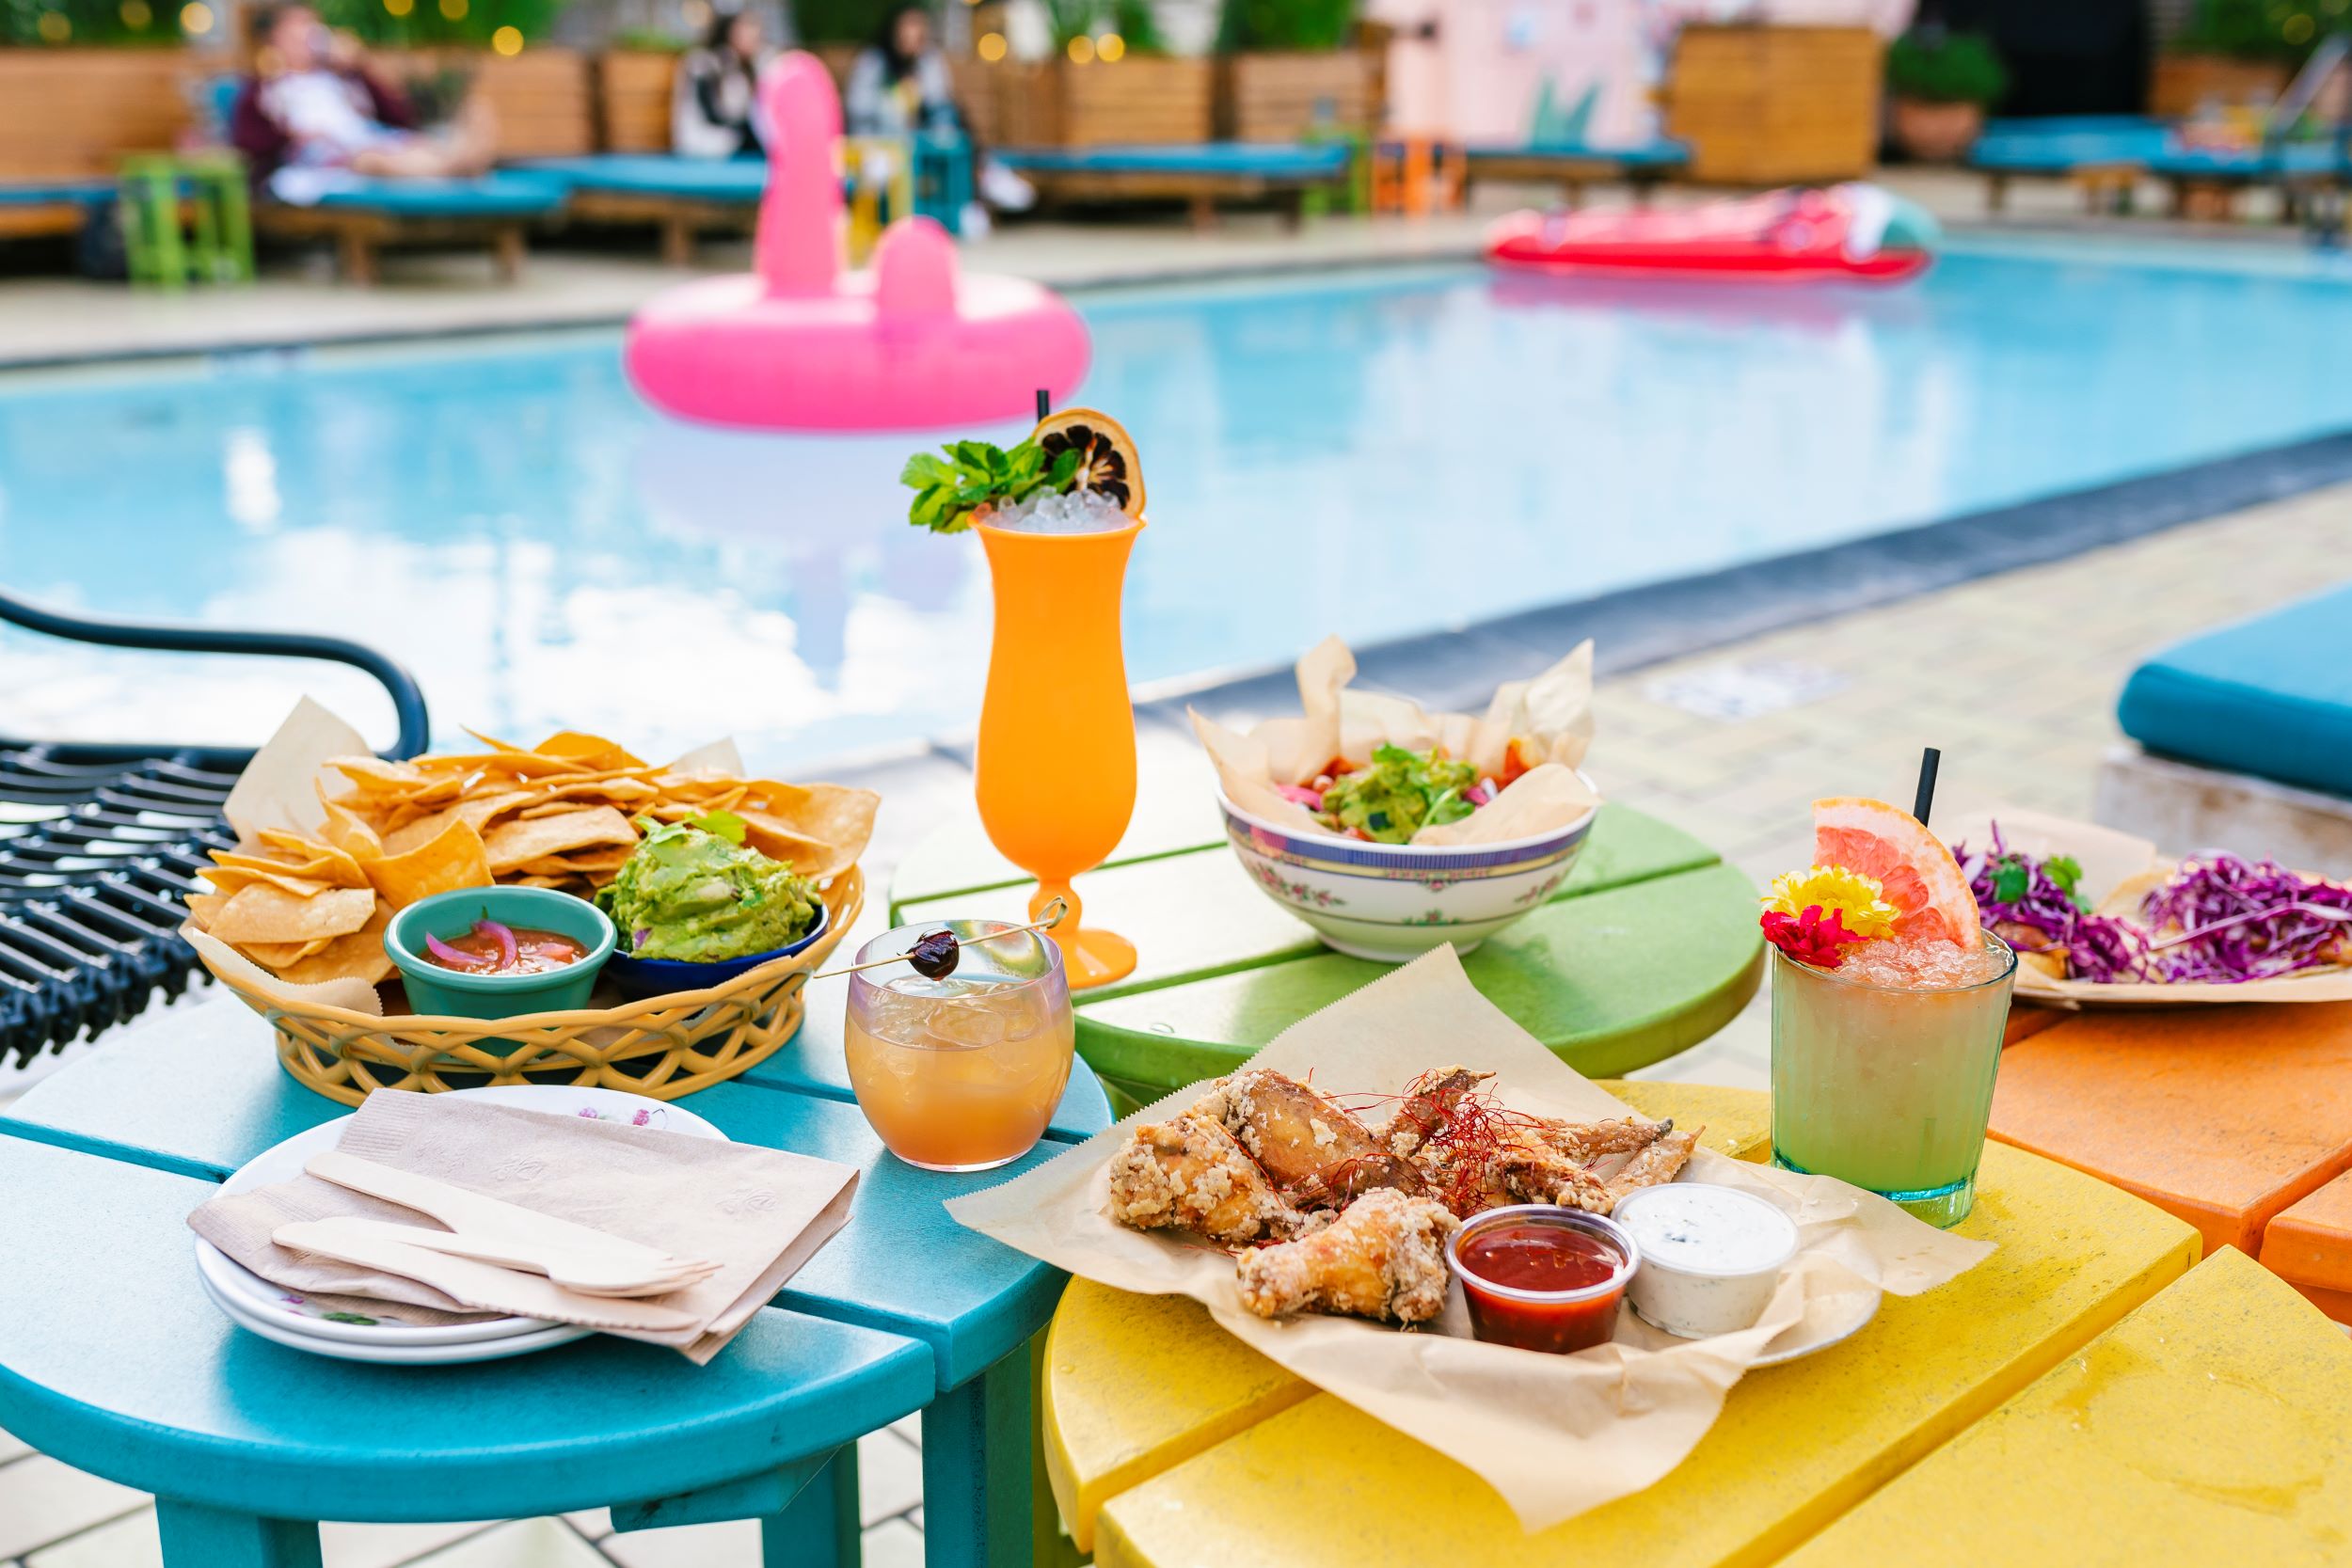 An image of the food and pool at DTLA's Broken Shaker.